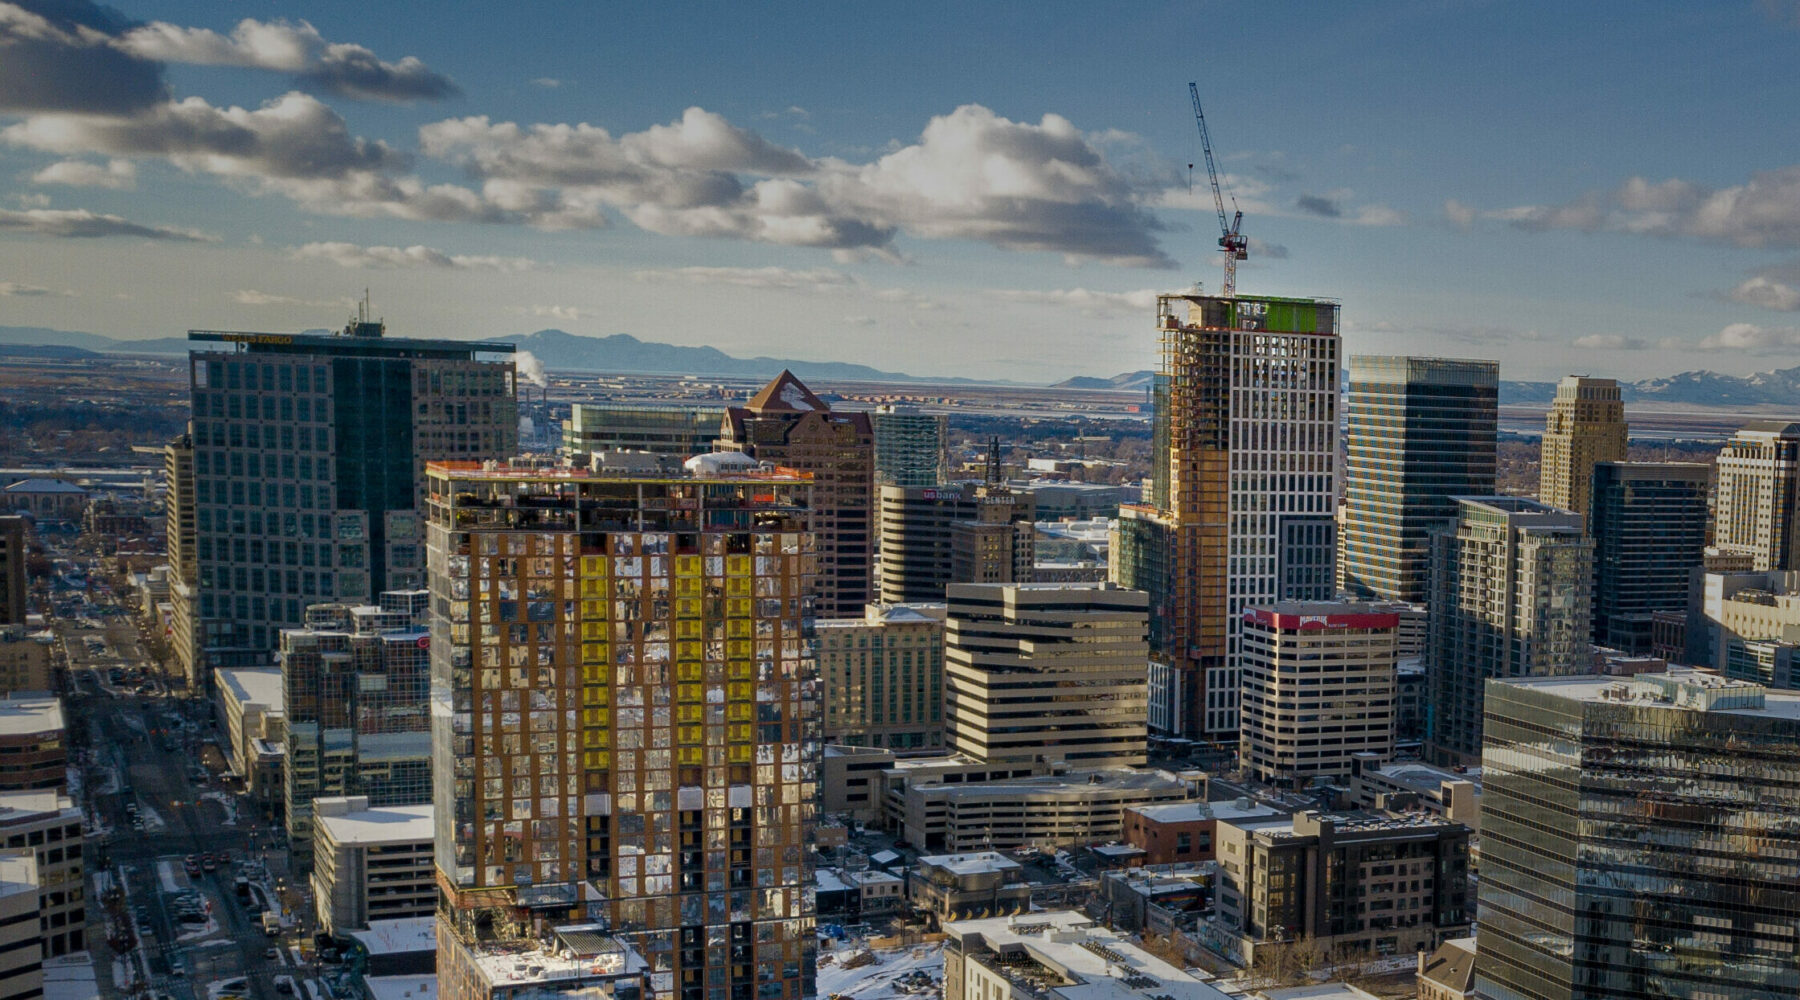 Utah’s booming economy, increasing population and lack of residential construction are amplifying the need for multifamily housing options.